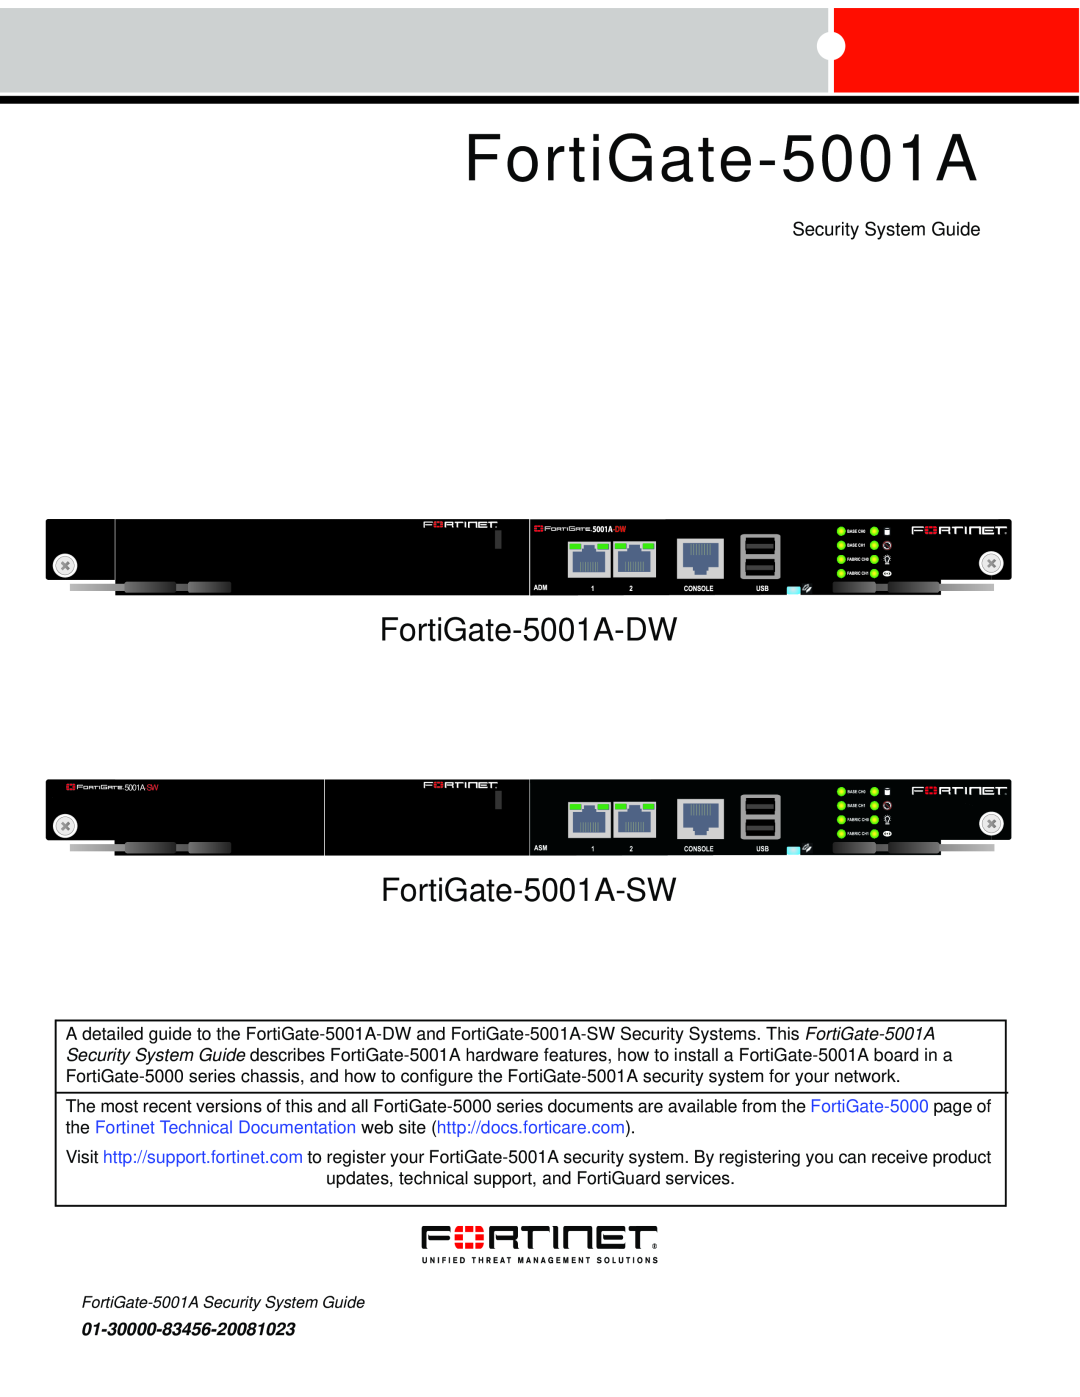 Fortinet manual Security System Guide, FortiGate-5001A-DW, FortiGate-5001A-SW, 01-30000-83456-20081023 